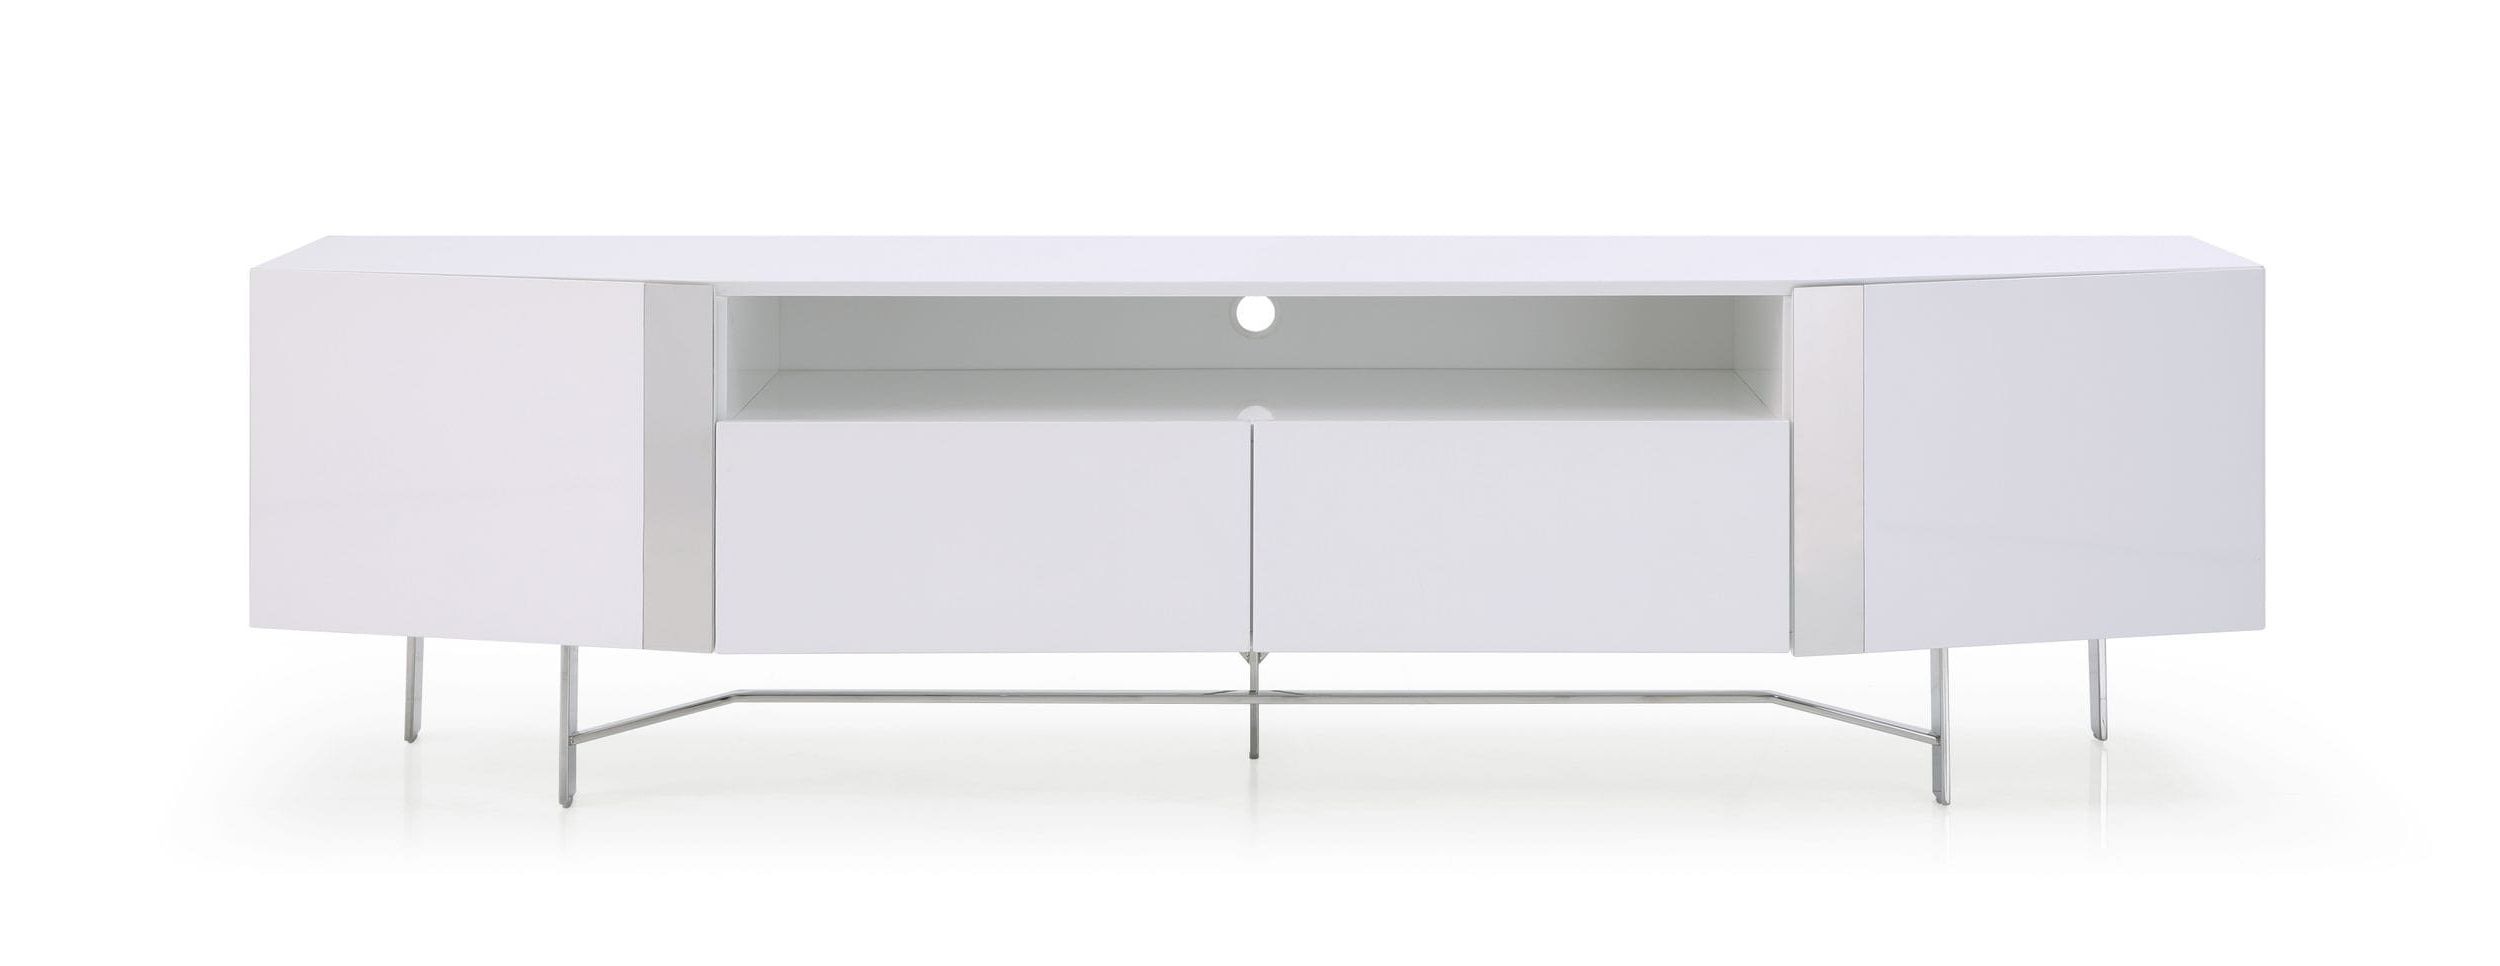 Modrest Fairmont – Modern White High Gloss & Stainless With Zimtown Modern Tv Stands High Gloss Media Console Cabinet With Led Shelf And Drawers (View 16 of 20)